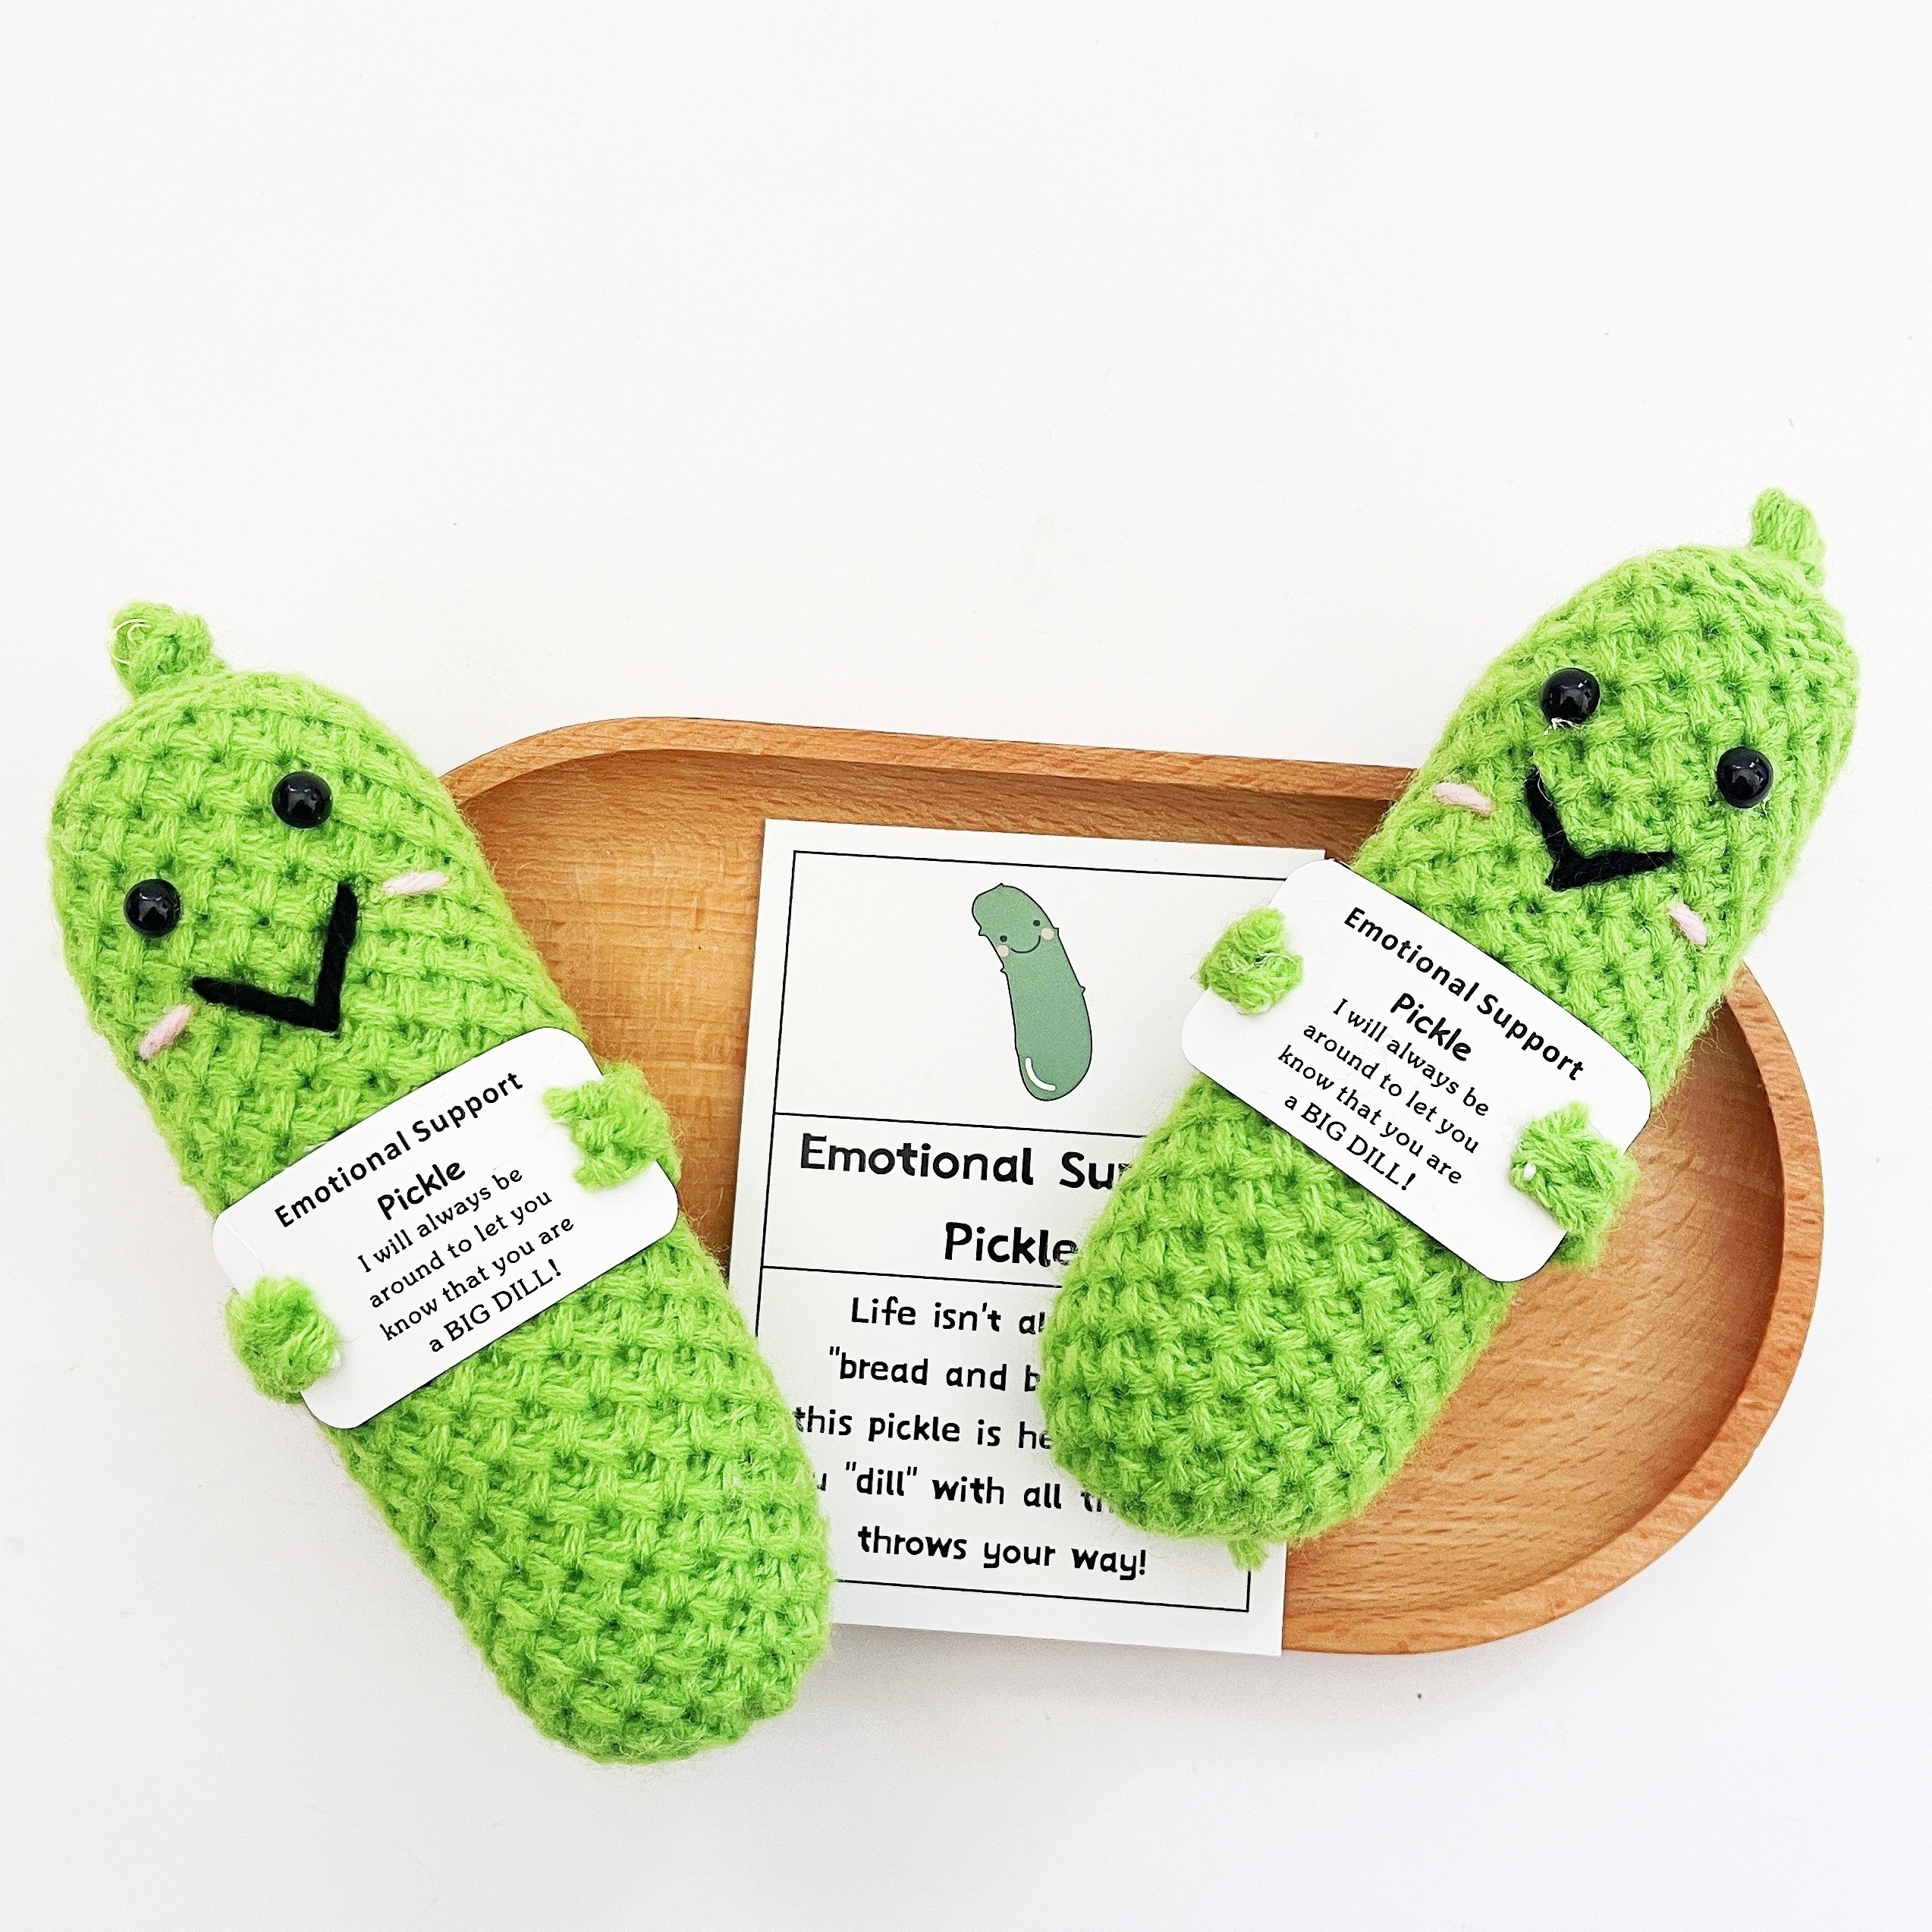 utosday Handmade Emotional Support Pickled Cucumber Gift, Cute Crochet  Christmas Pickle Knitting Doll Ornaments, Funny Reduce Pressure Pickle Toy